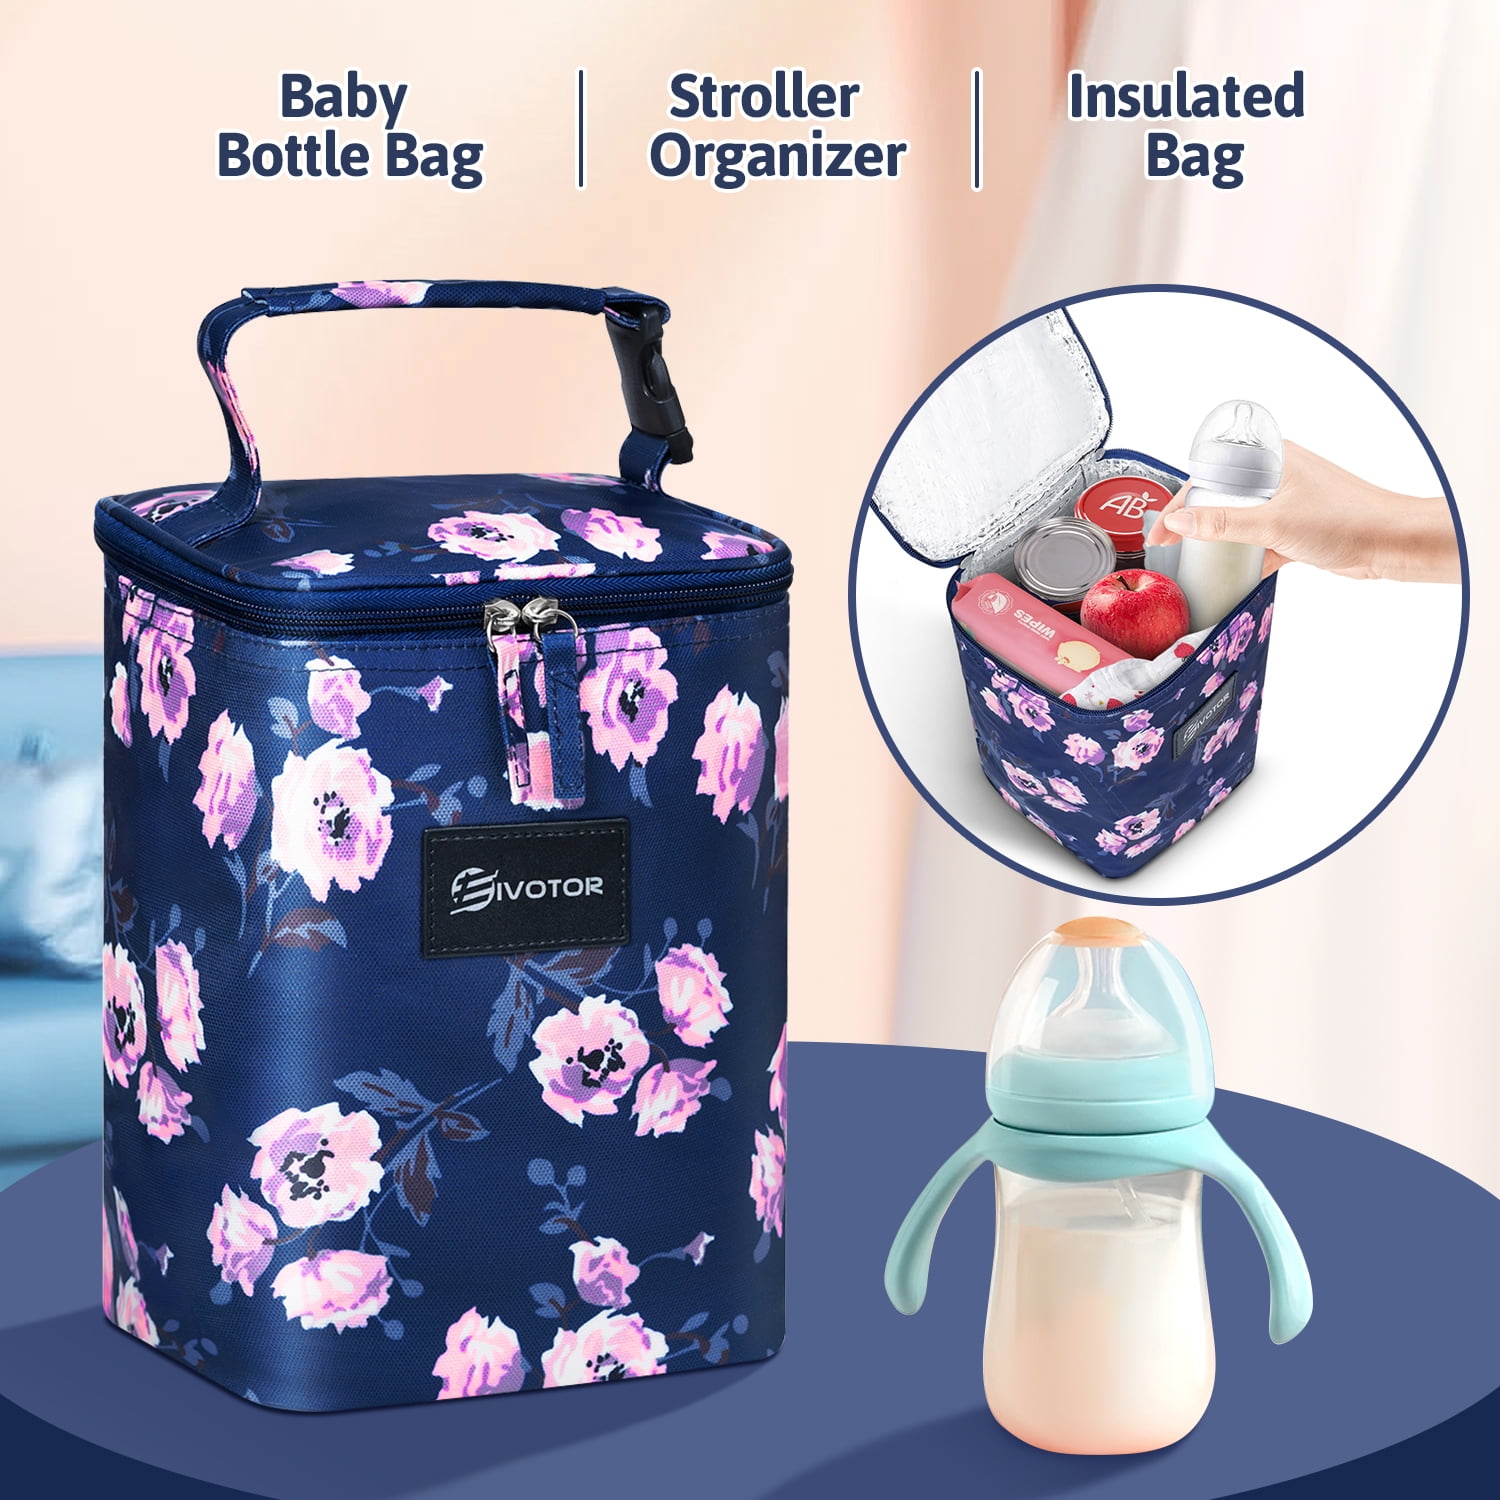 ÖSSZEFUT Insulated Breastmilk Cooler Baby Bottle Bag Bottles Easily Attaches to Stroller Flags Fits up to 4 Large 8 Oz 